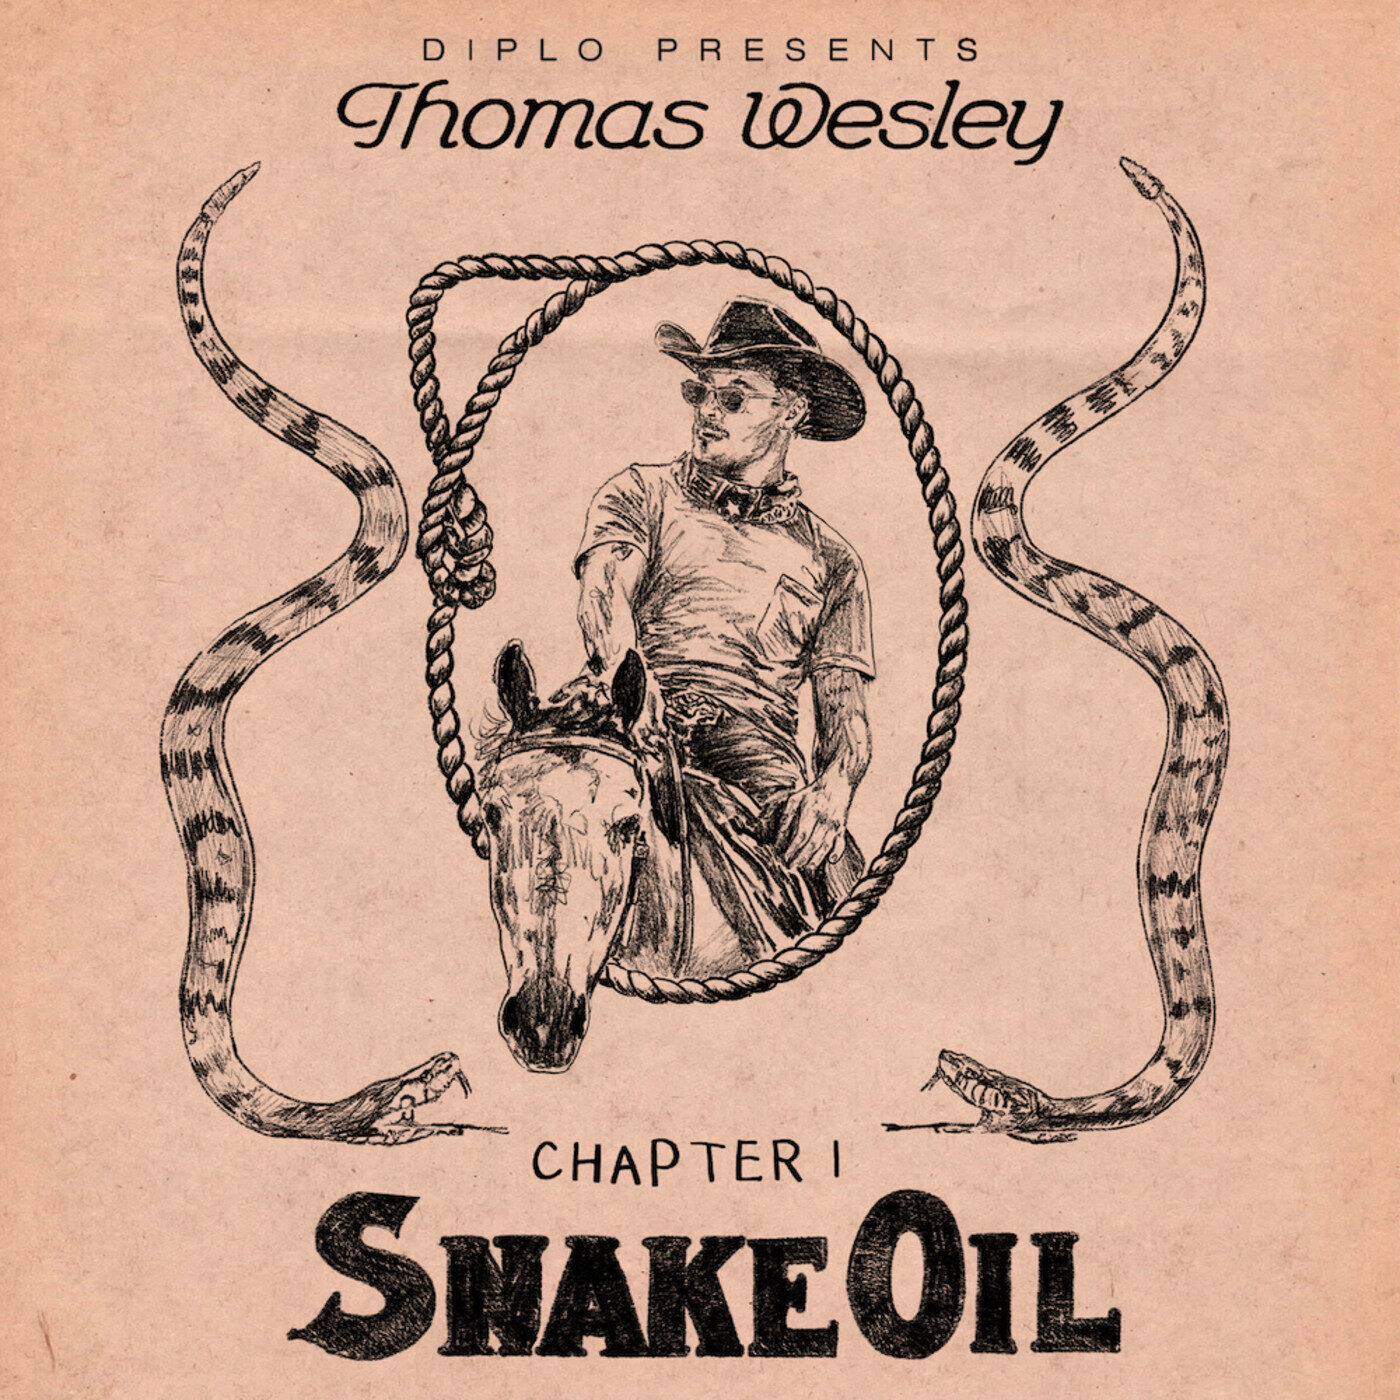 https://www.youredm.com/ "srcset =" https://www.youredm.com/wp-content/uploads/2020/05/diplo-present-thomas-wesley-chapter-1-snake-oil- stream.jpg 1400w, https://www.youredm.com/wp-content/uploads/2020/05/diplo-present-thomas-wesley-chapter-1-snake-oil-stream-1024x1024.jpg 1024w, https: //www.youredm.com/wp-content/uploads/2020/05/diplo-present-thomas-wesley-chapter-1-snake-oil-stream-150x150.jpg 150w, https://www.youredm.com /wp-content/uploads/2020/05/diplo-present-thomas-wesley-chapter-1-snake-oil-stream-768x768.jpg 768w, https://www.youredm.com/wp-content/uploads/ 2020/05 / diplo-presents-thomas-wesley-chapter-1-snake-oil-stream-125x125.jpg 125w "tailles =" (largeur max: 1400px) 100vw, 1400px "/></div>
</div>
<section class=